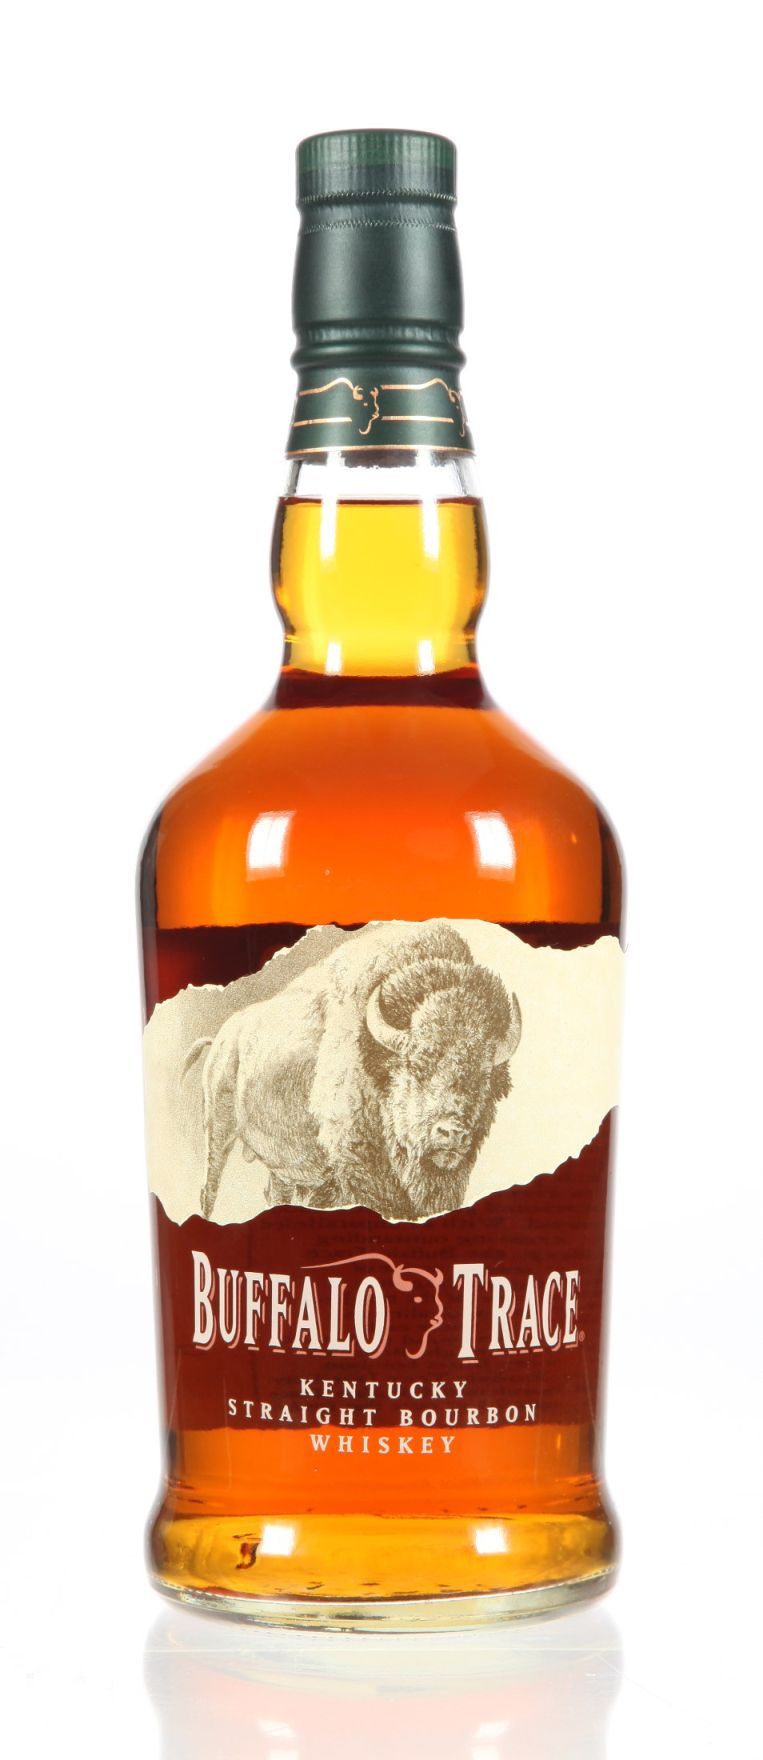 Buffalo Trace | Whisky.de » To the online store